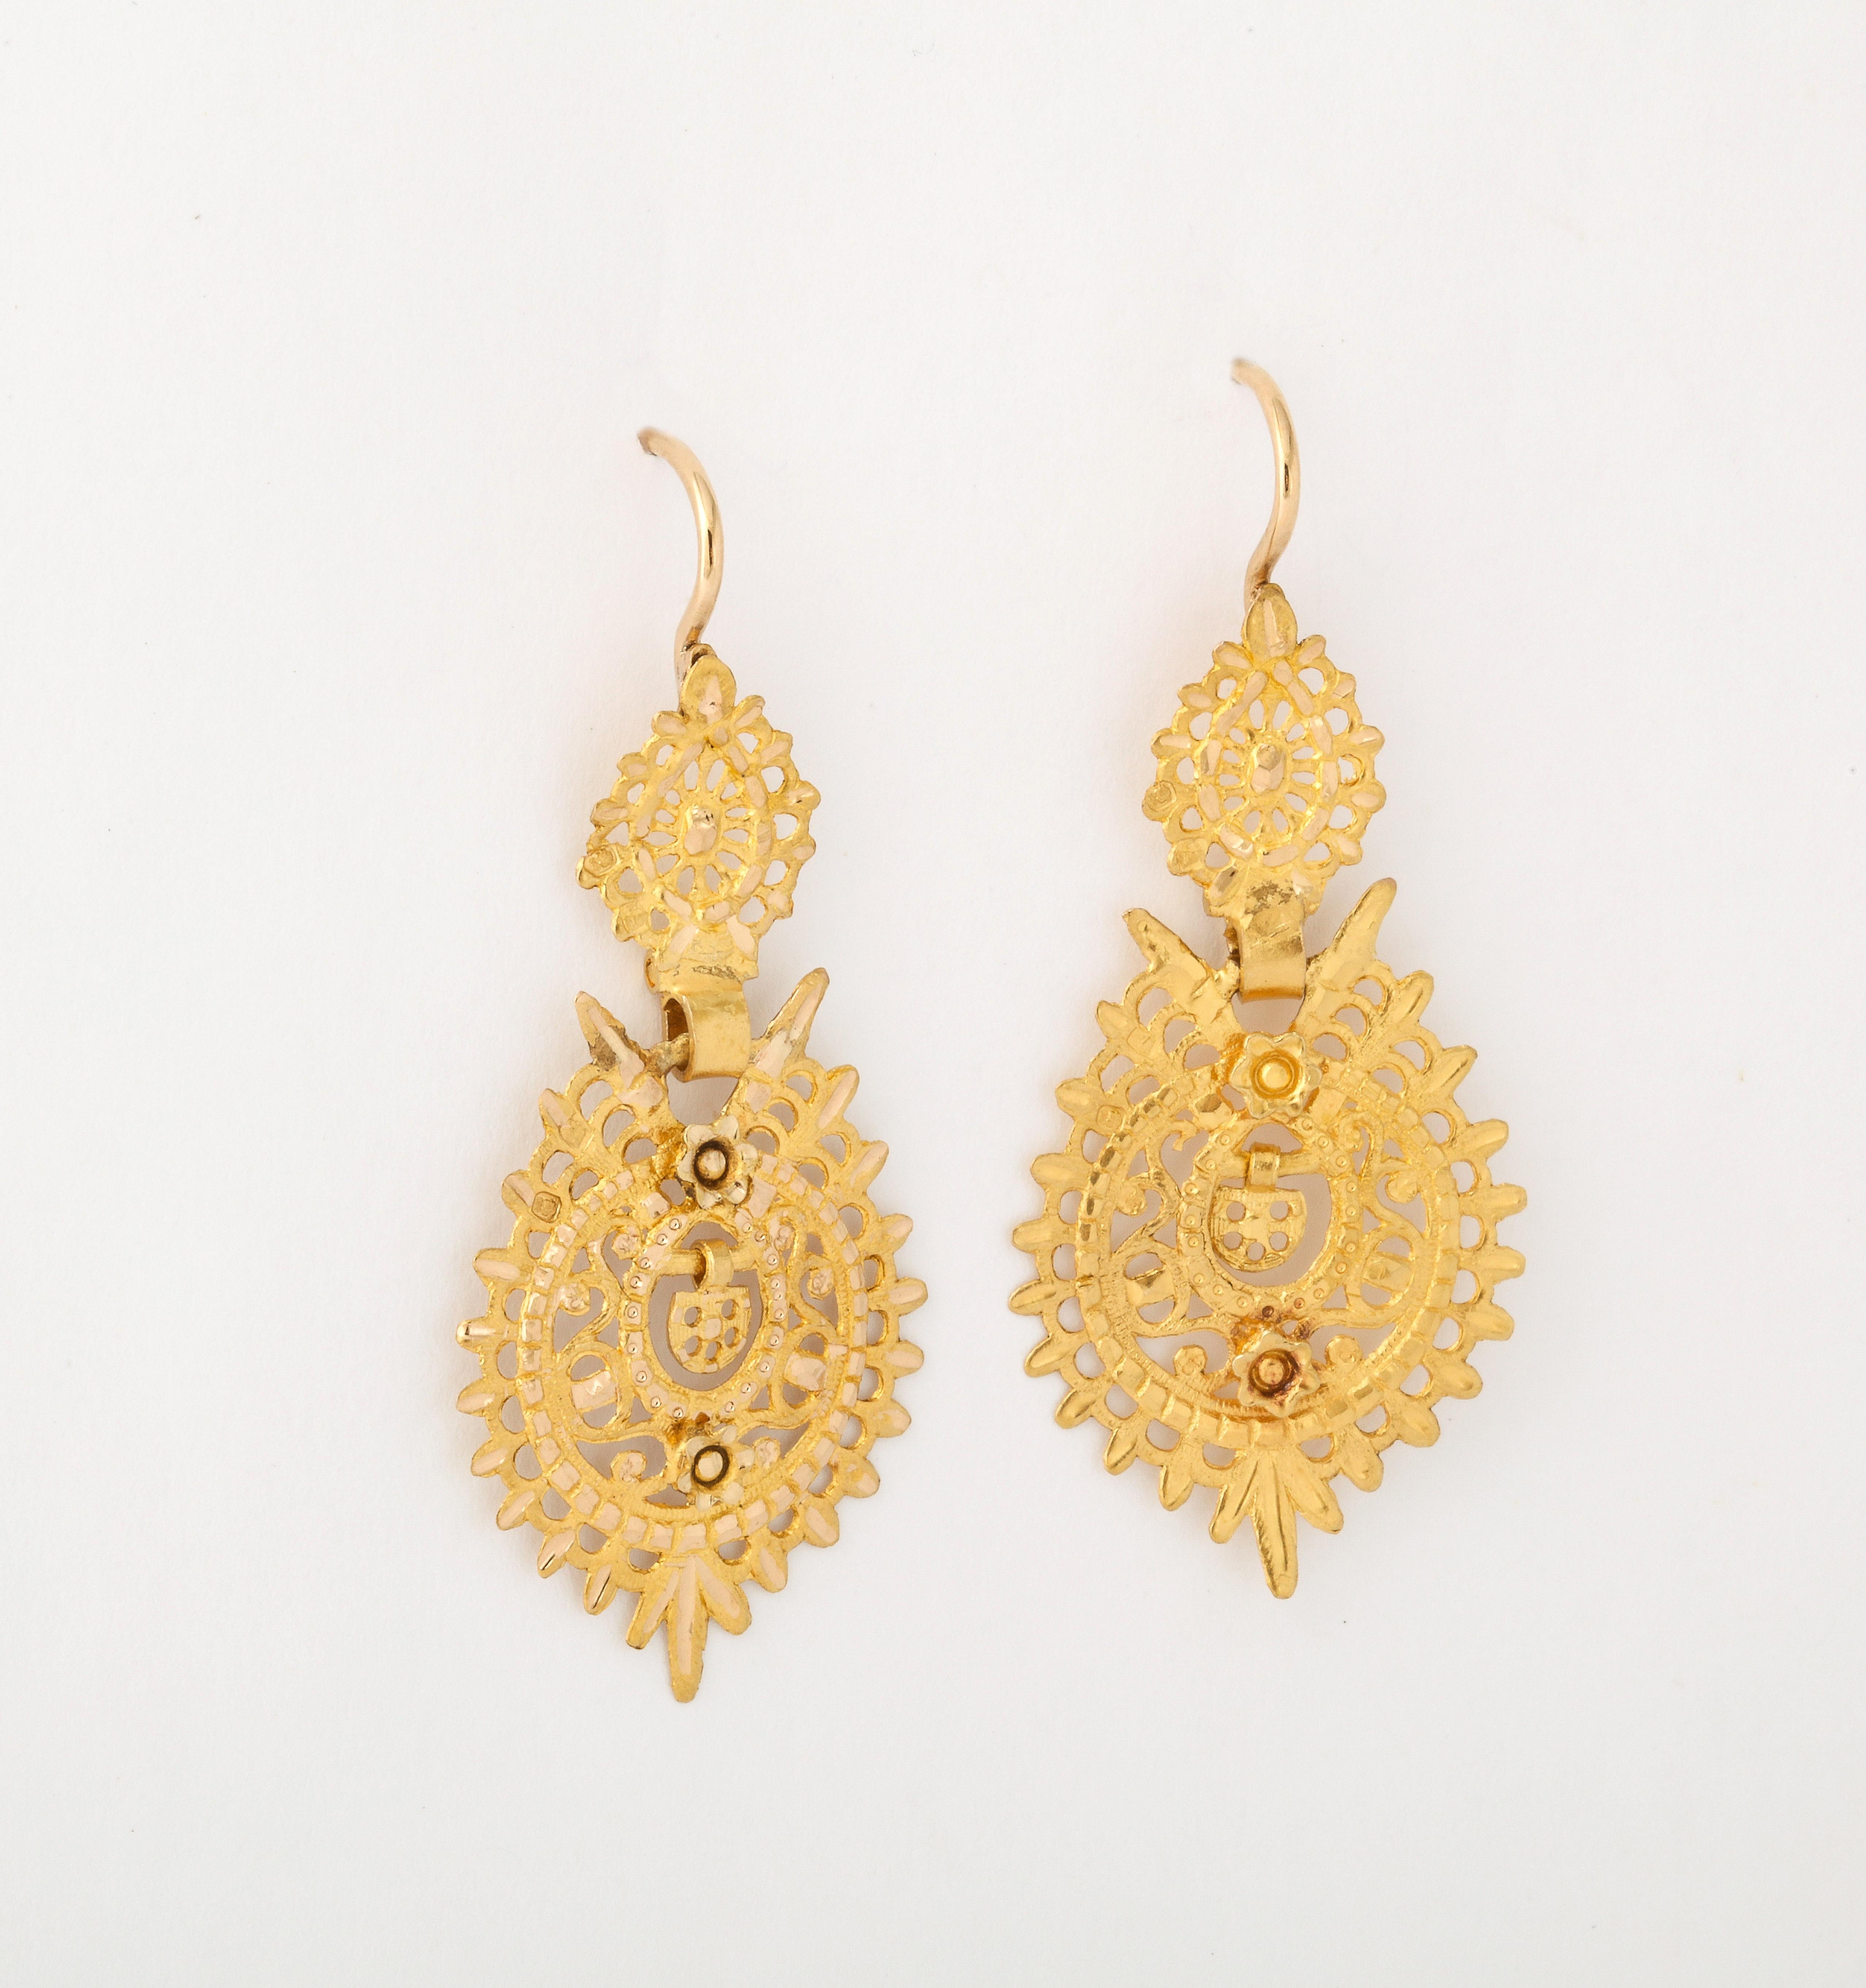 Portuguese Sequile Earrings such as these 19Kt gold lacy dangles have been made since the late 1700's in Portugal. They are classic. Most pair are much larger. This is a medium sized pair made in 1938 in the same design as the 18th century Sequels.